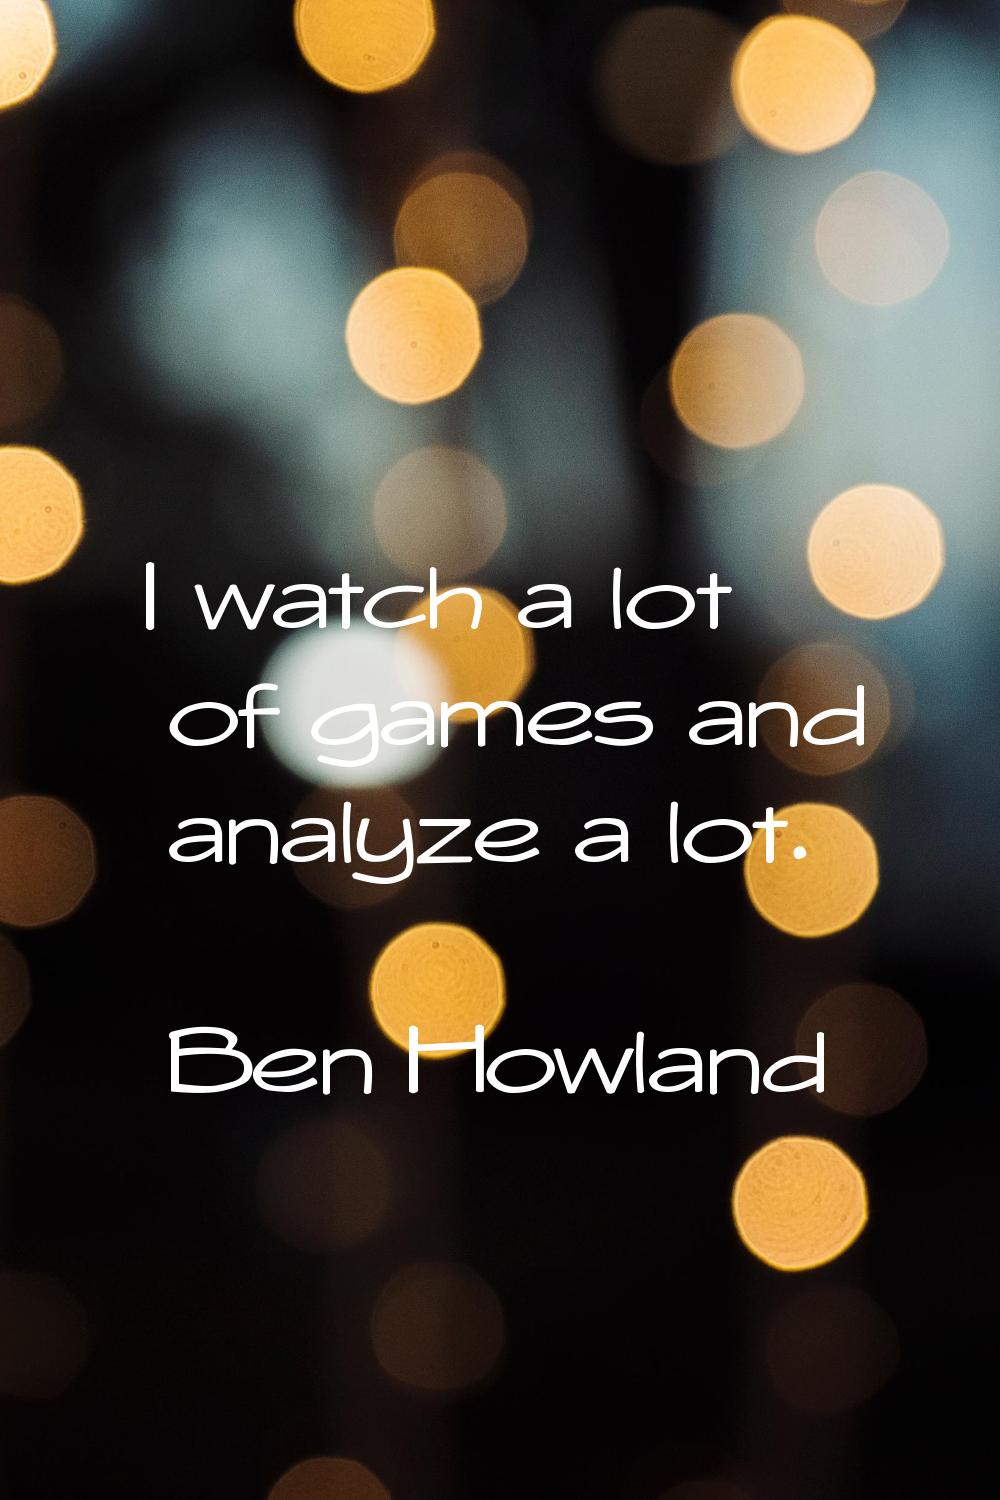 I watch a lot of games and analyze a lot.